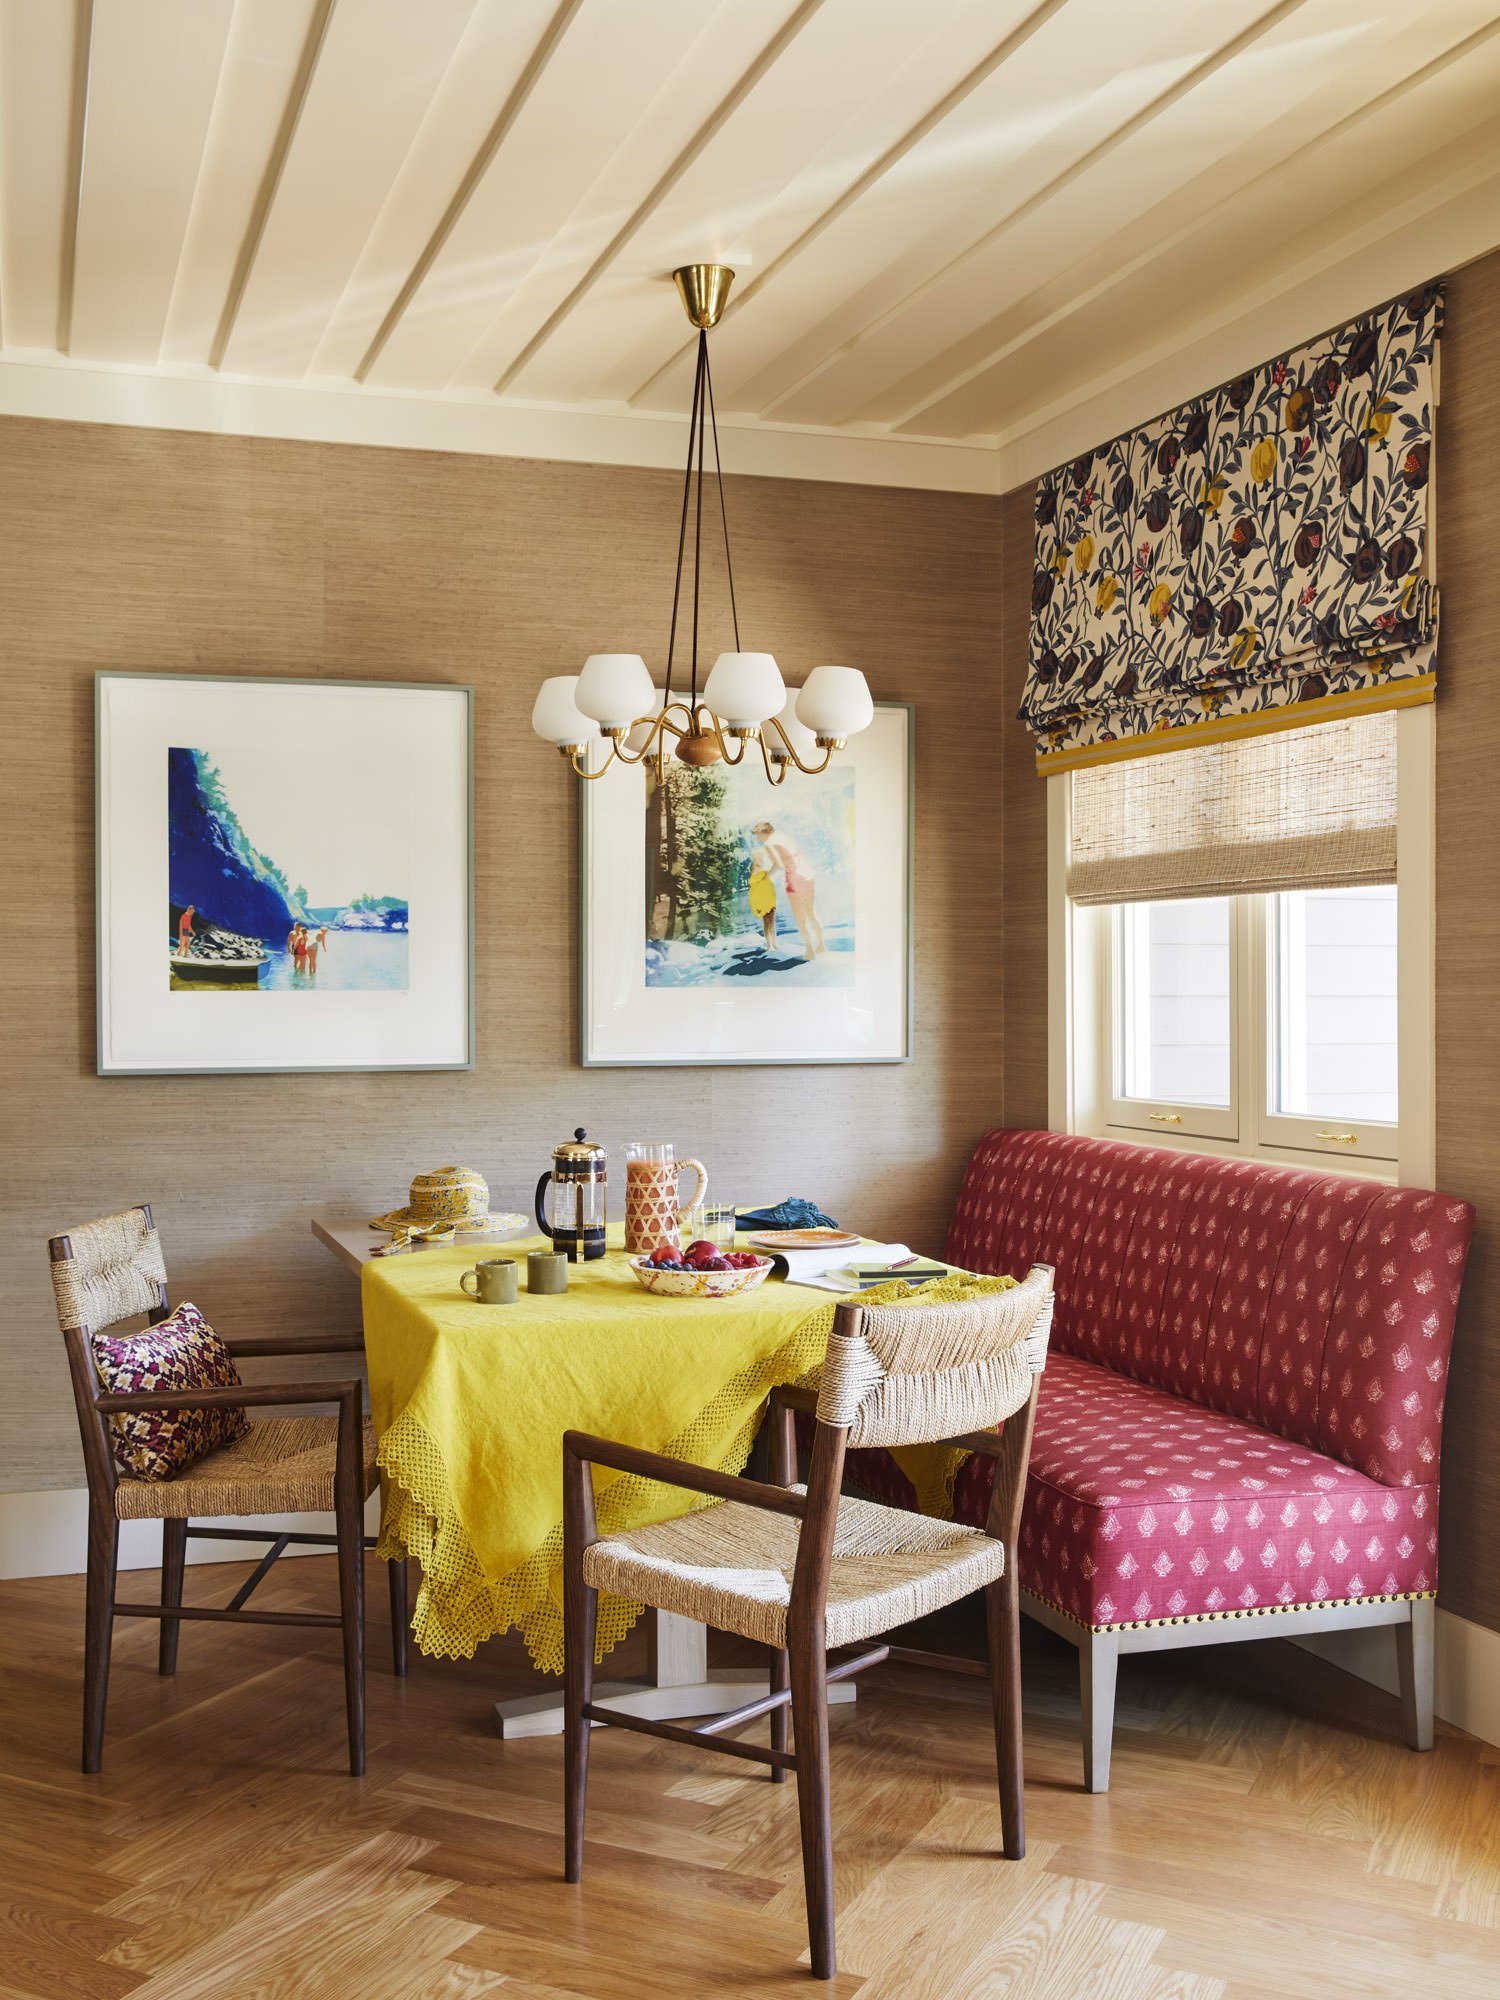   THE BREAKFAST NOOK INCLUDES HERRINGBONE OAK FLOOR, GRASS-CLOTH WALLPAPER, A VINTAGE ITALIAN CHANDELIER, AND A CUSTOM TABLE BY YELLOWSTONE TRADITIONS. THE BANQUETTE IS UPHOLSTERED IN BLOCK PRINTED FABRIC FROM LISA FINE. THE WALNUT AND RUSH DINING CH